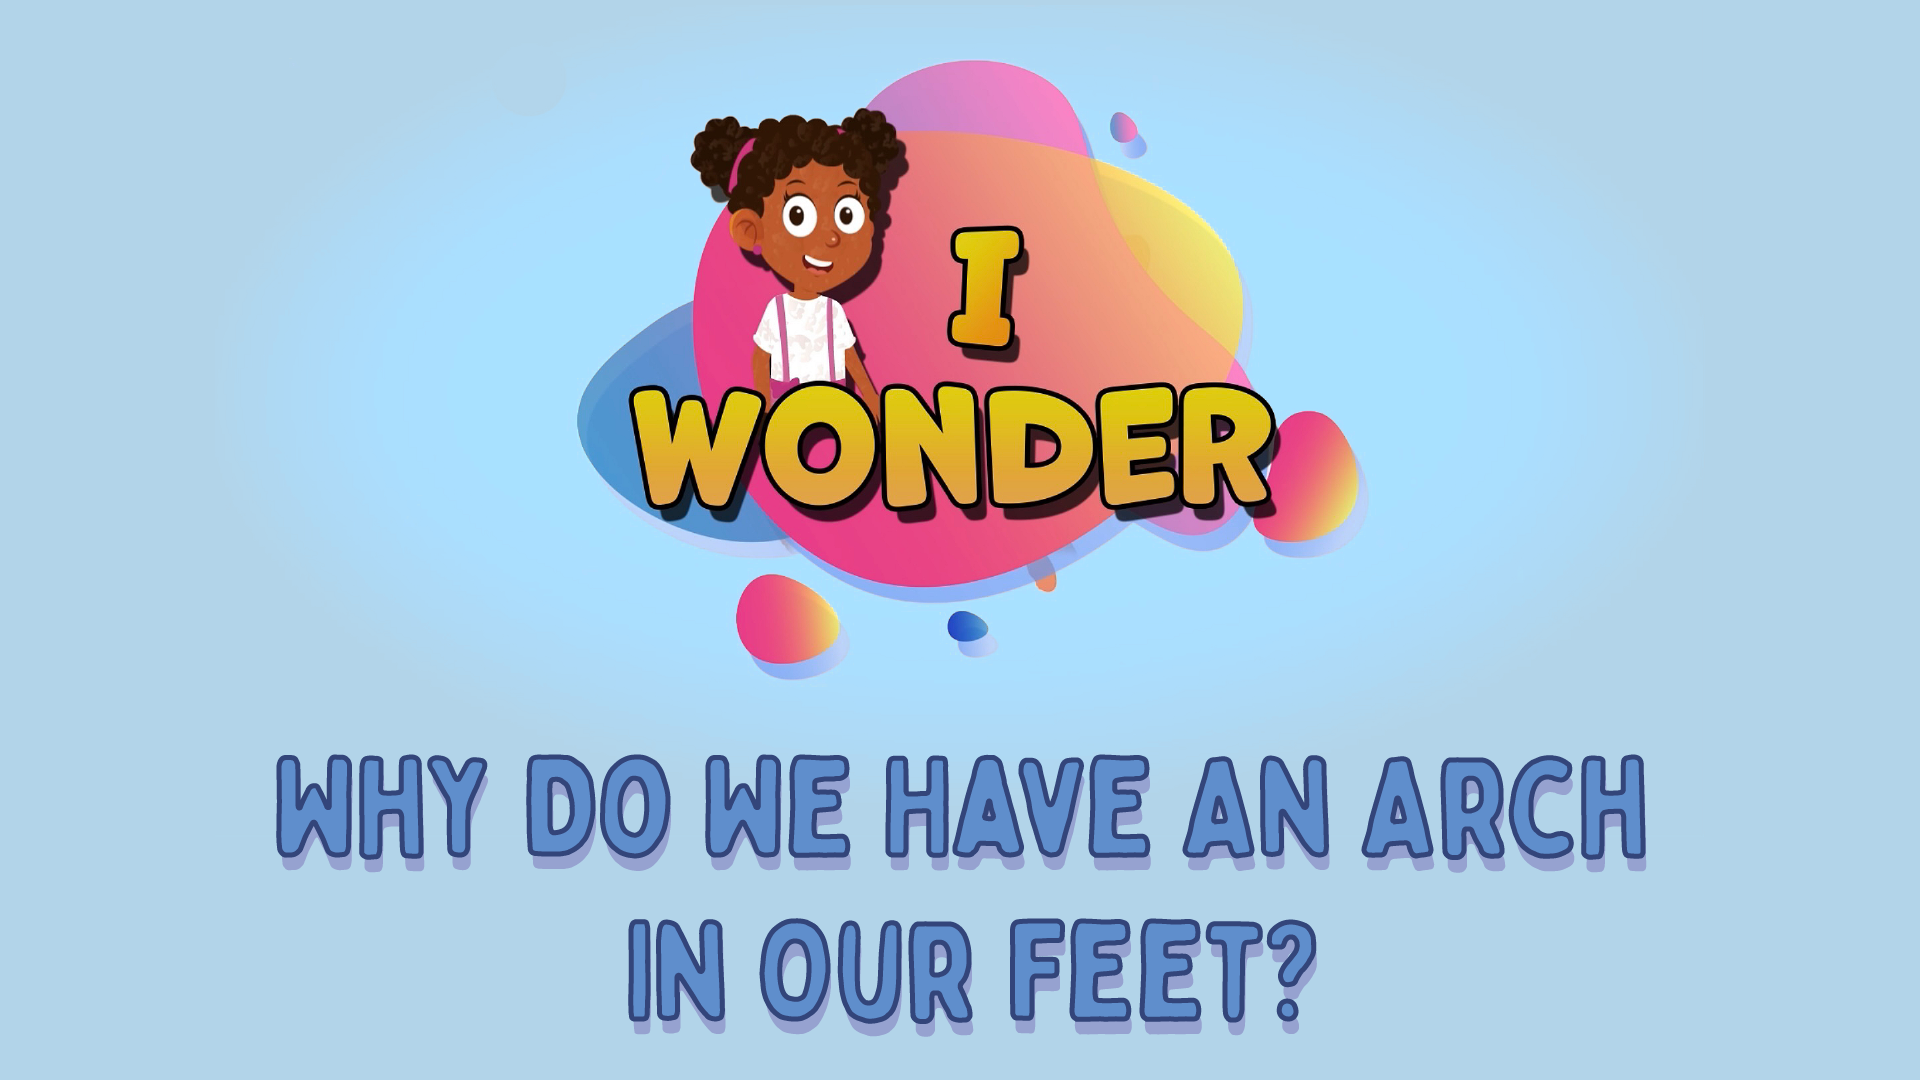 Why Do We Have An Arch In Our Feet?